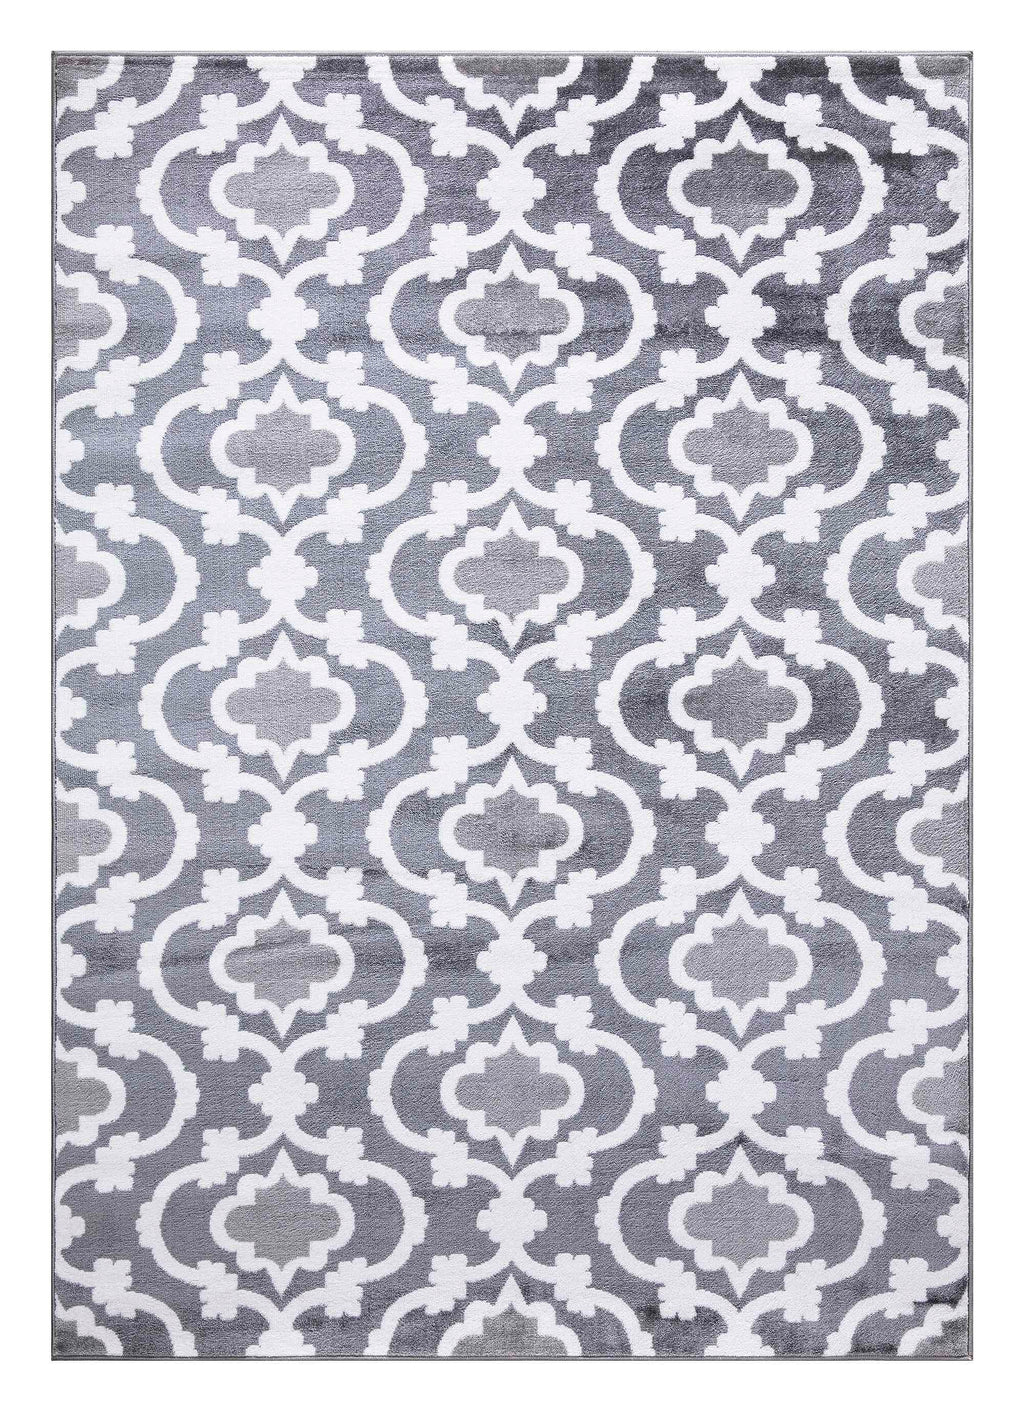 Trendy Moroccan Modern Rug over-view homelooks.com